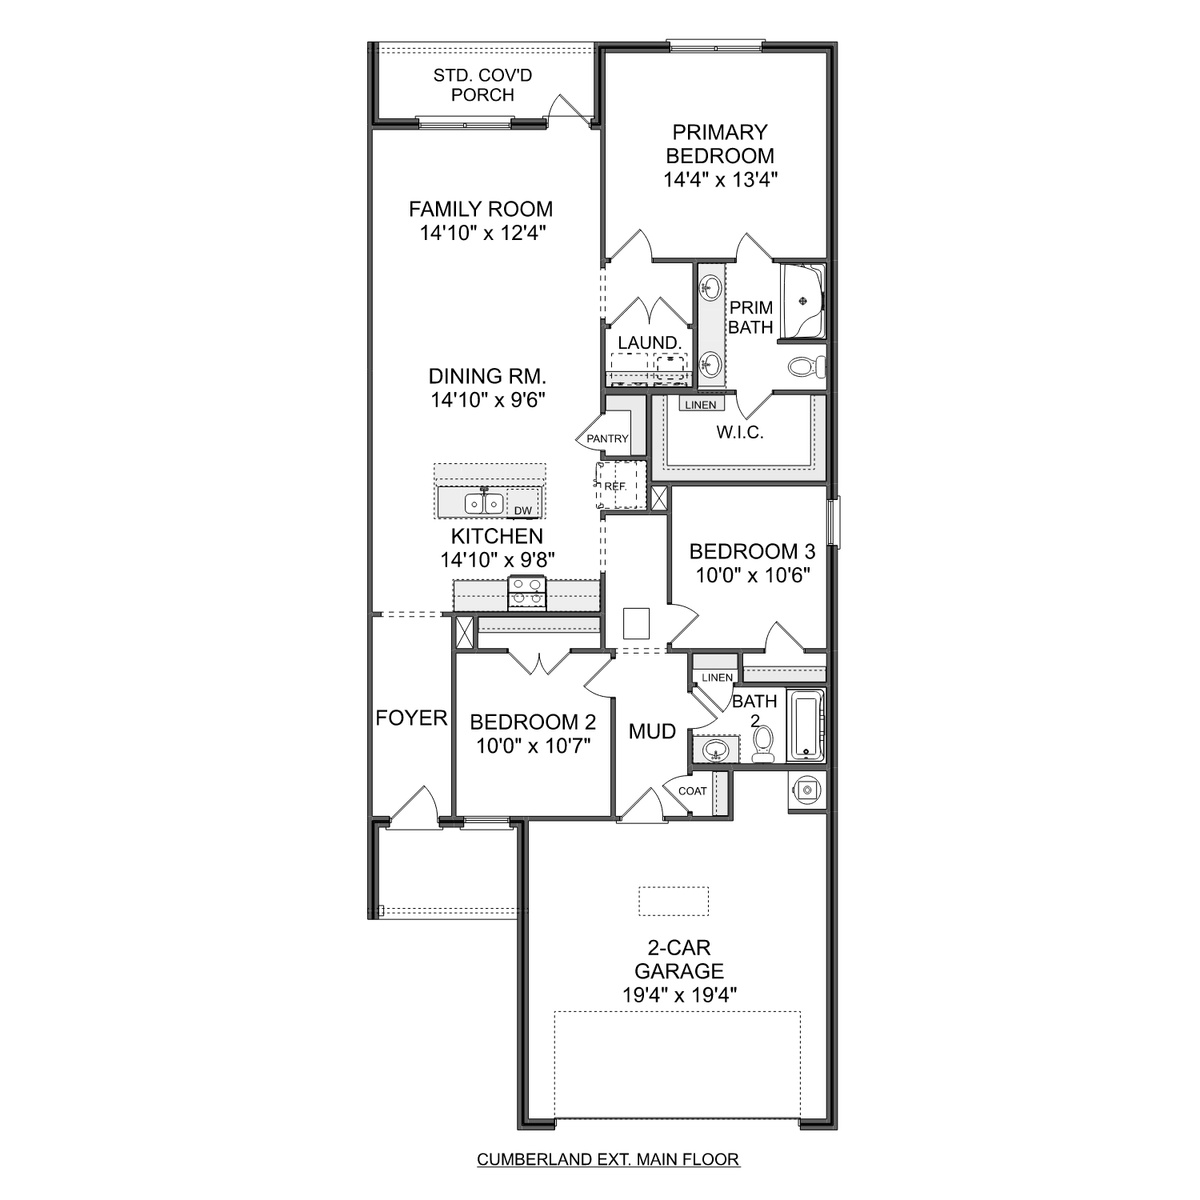 1 - The Cumberland D floor plan layout for 3149 Lea Lane in Davidson Homes' Hollon Meadow community.